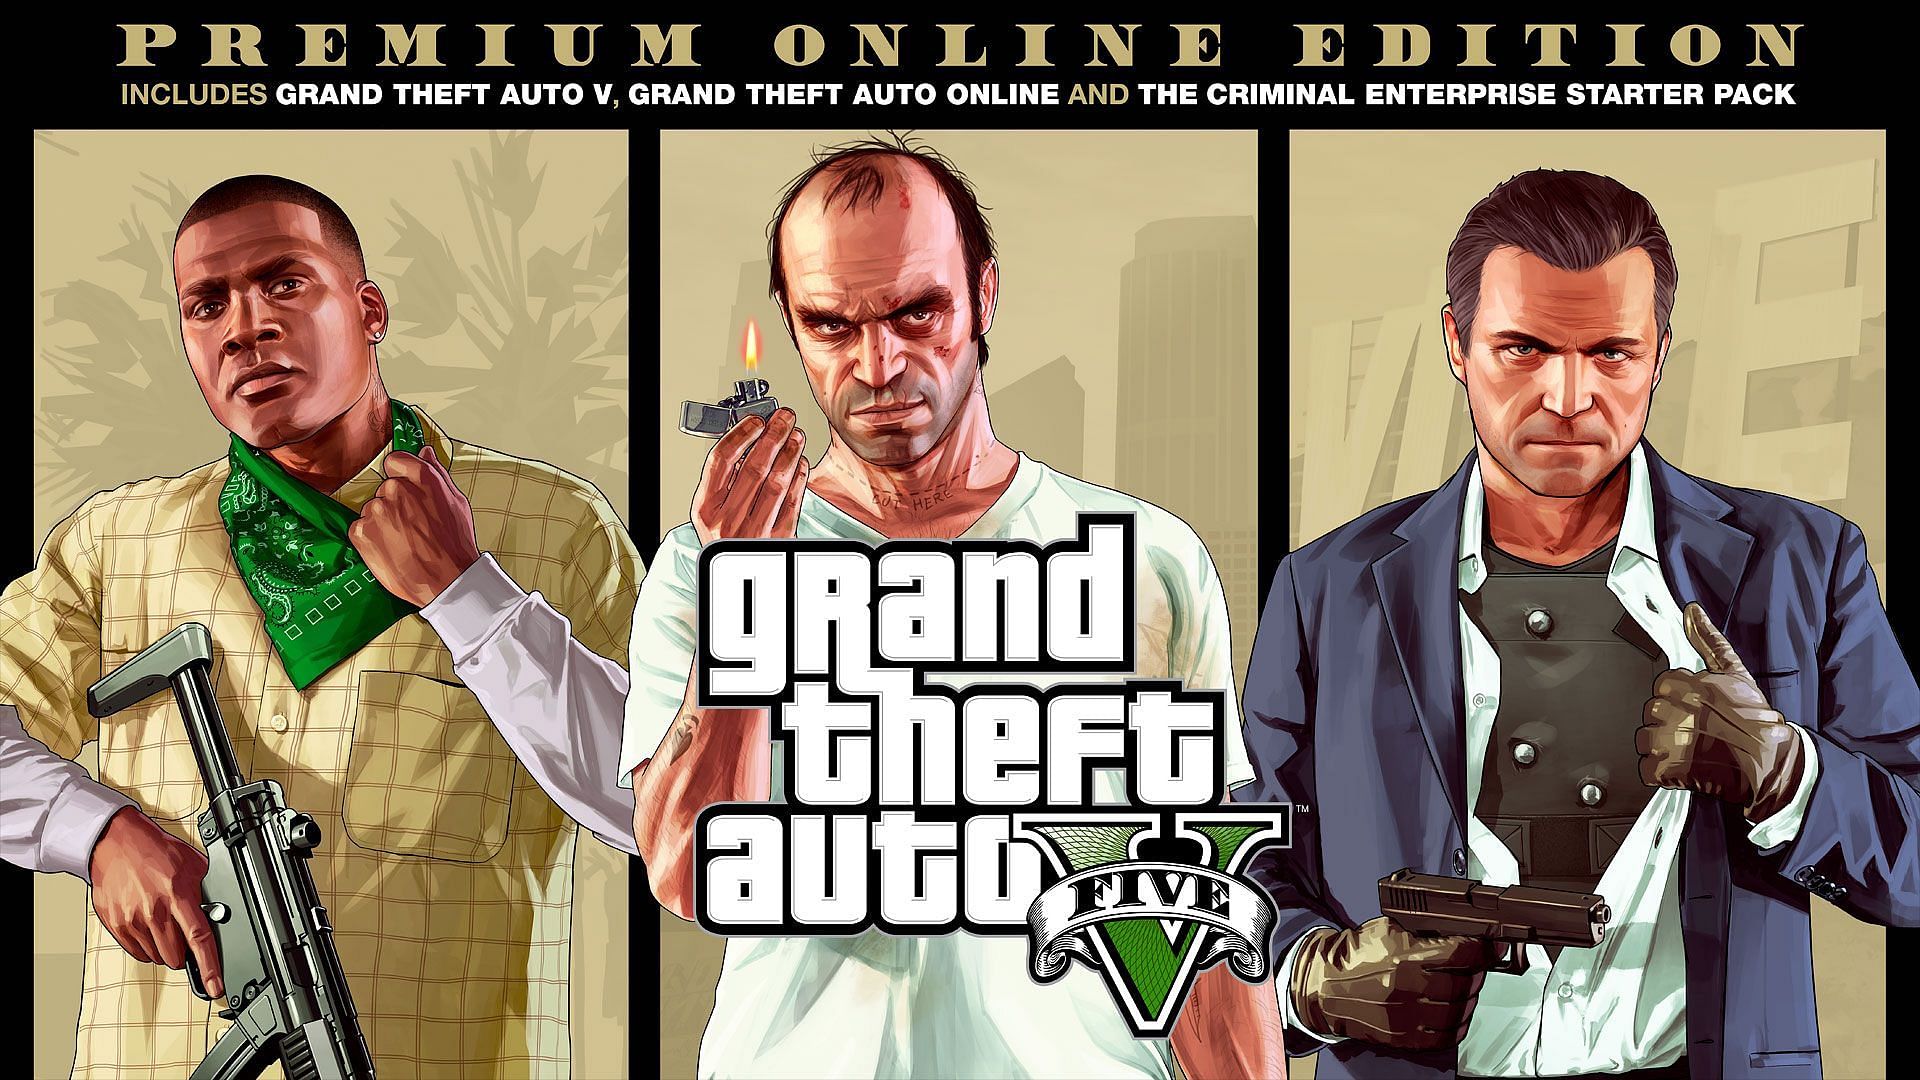 Does GTA 5 Premium Edition come with online? (Image via Rockstar Games)